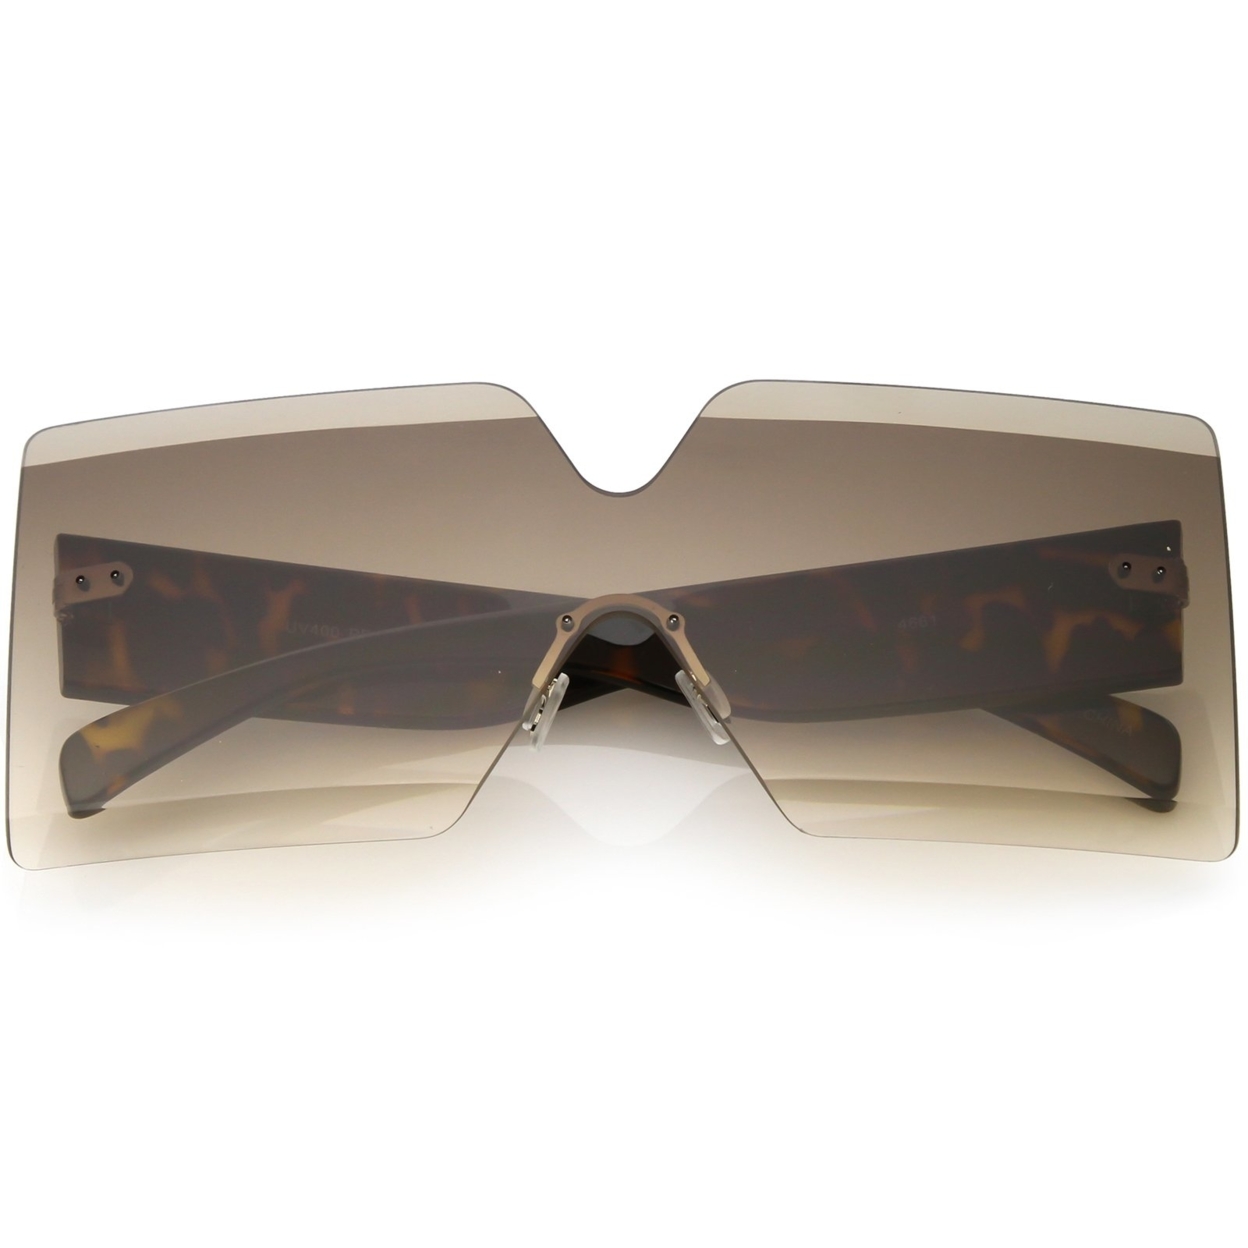 Oversize Rimless Shield Sunglasses Thick Arms Beveled Gradient Lens 73mm - Tortoise / Brown Gradient